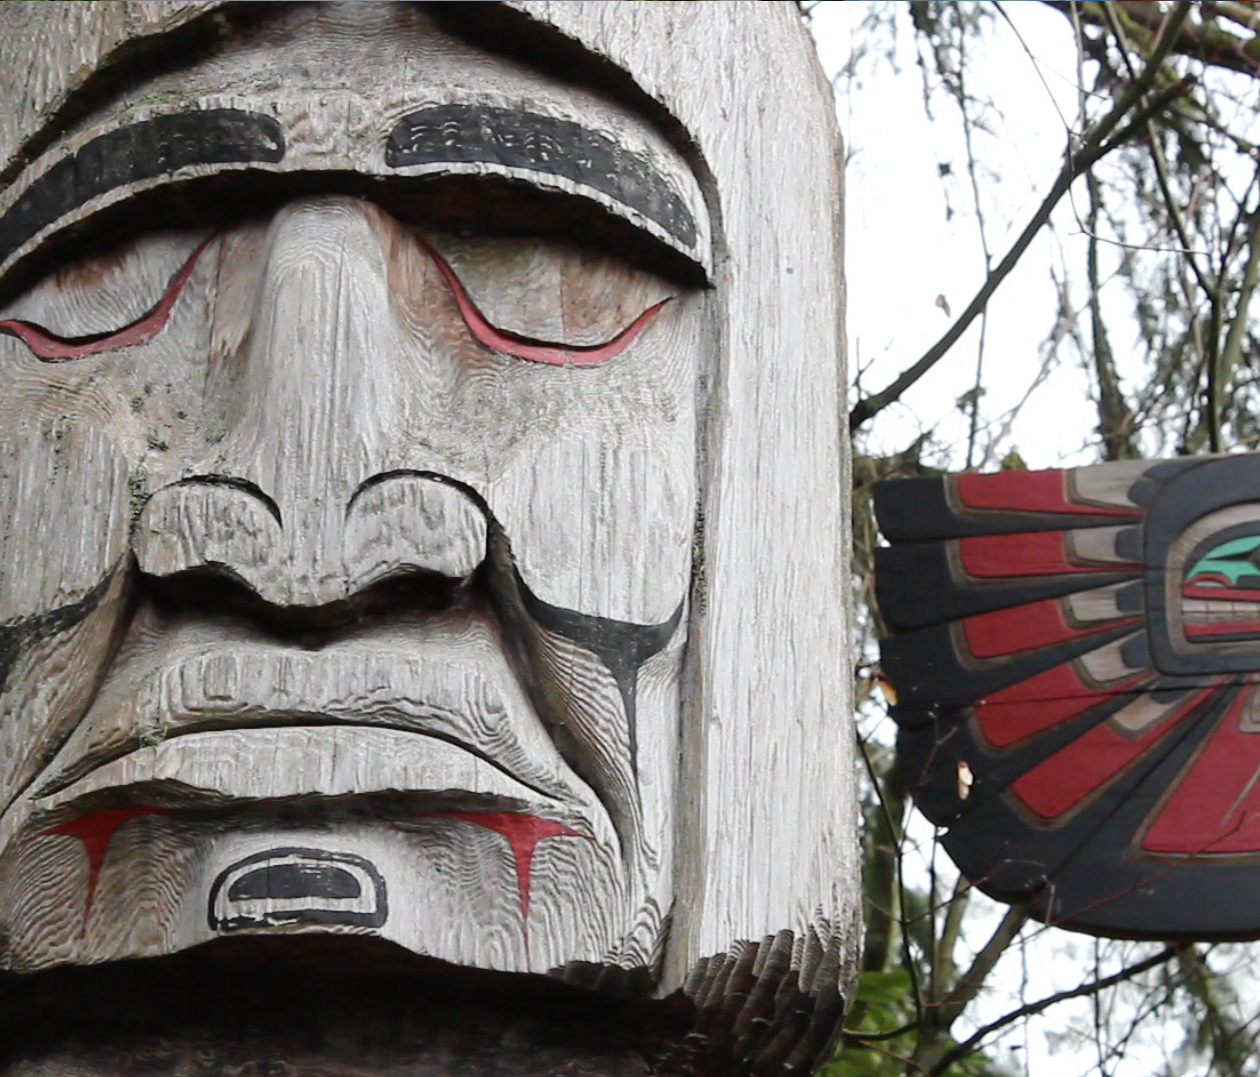 Overlooking Capilano Bridge is one of the largest private collections of totem poles. Or more accurately, story poles.